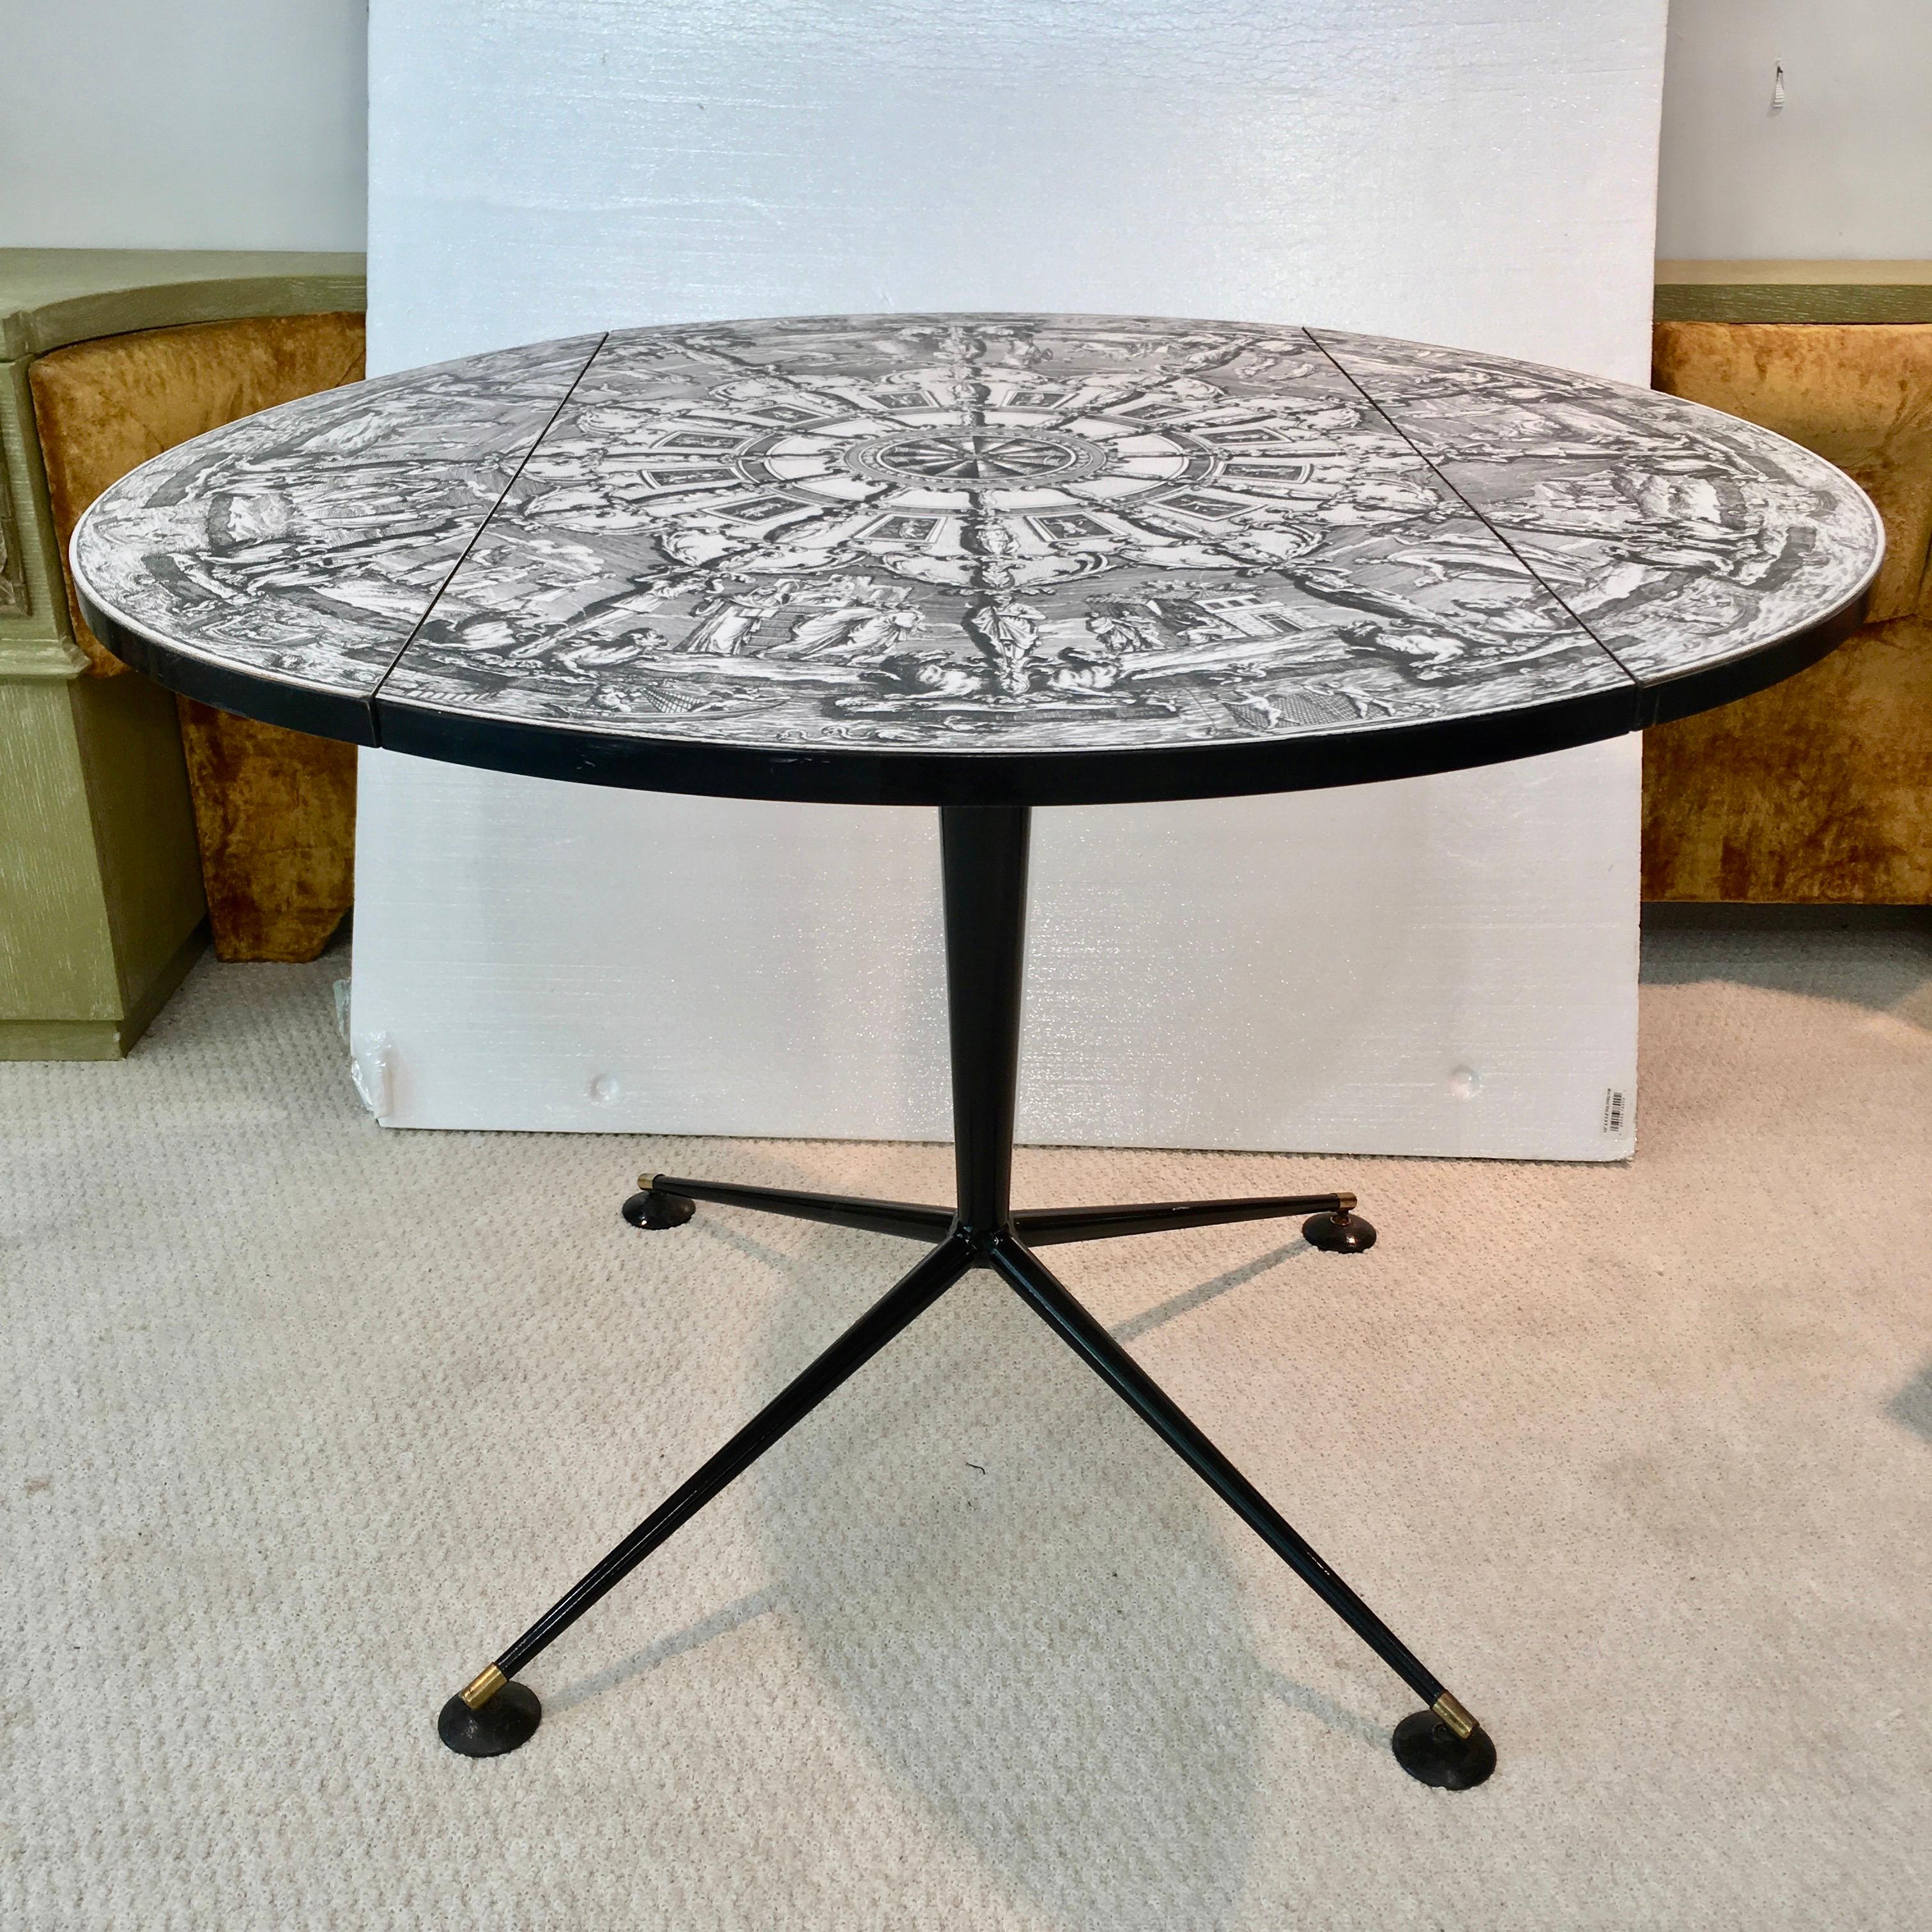 Mid-20th Century Andrew J. Milne for Heal's Round Drop Leaf Table For Sale